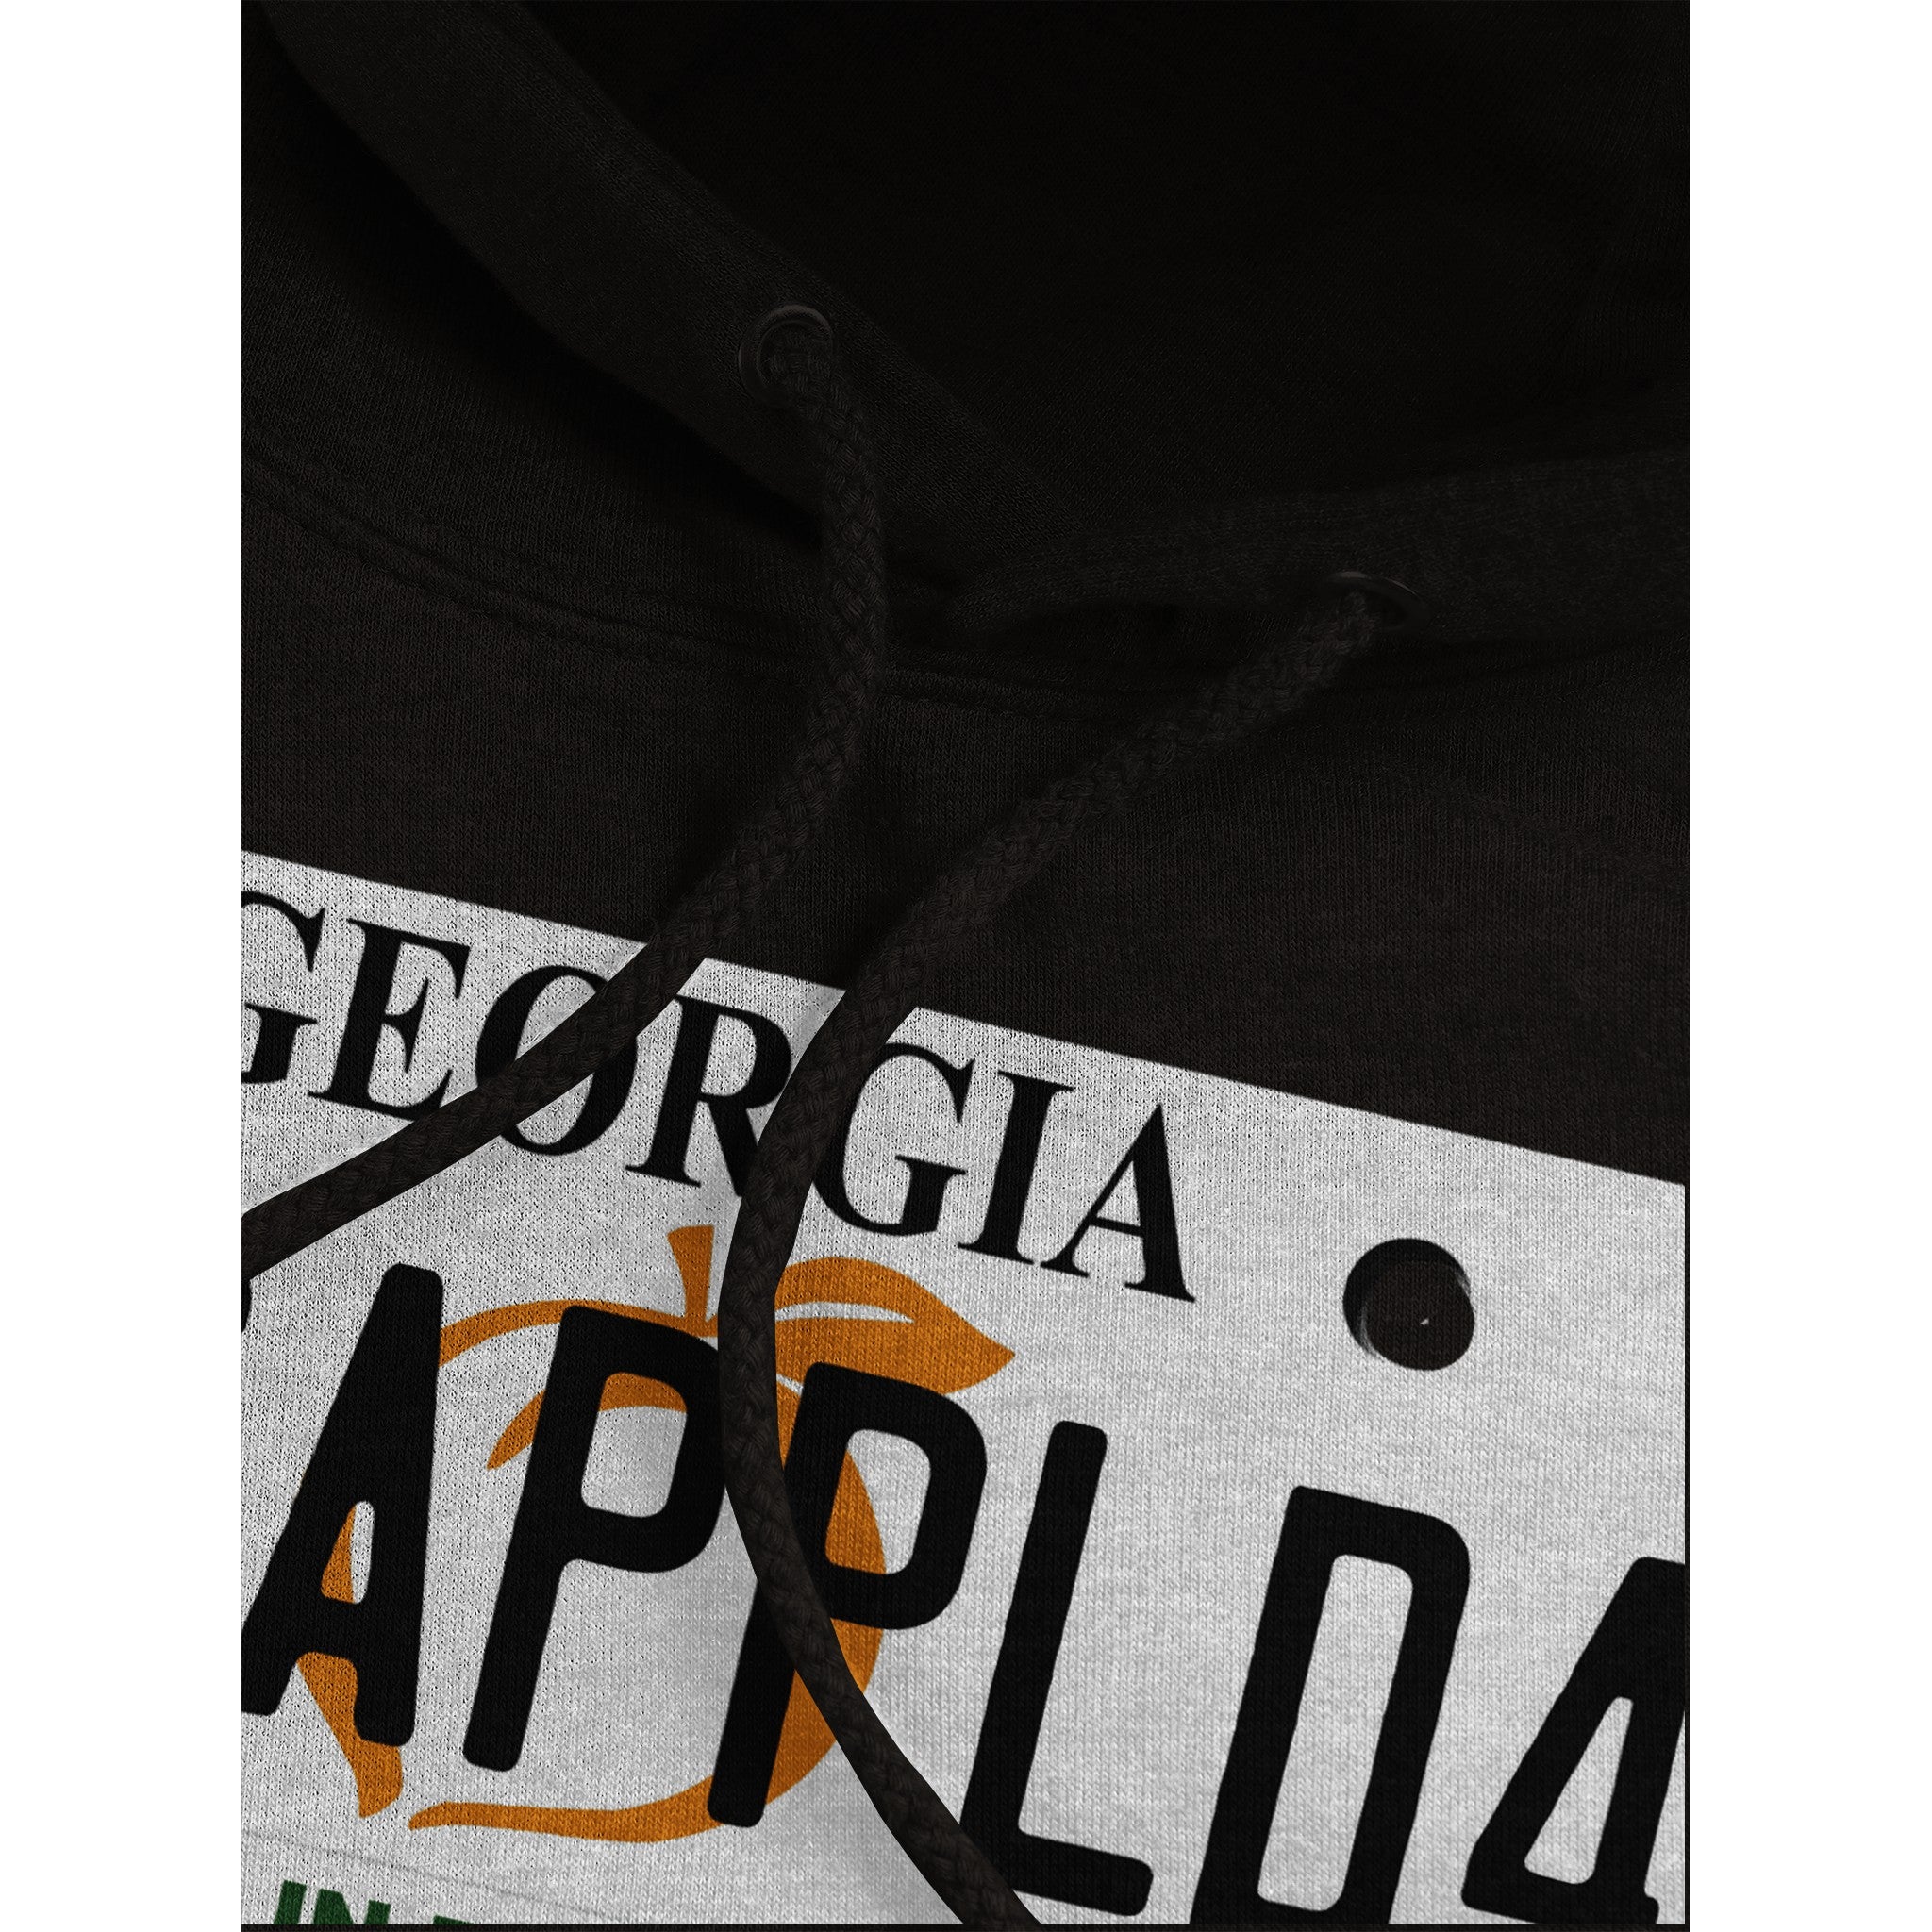 "Tag Applied For" - Premium Unisex Pullover Hoodie